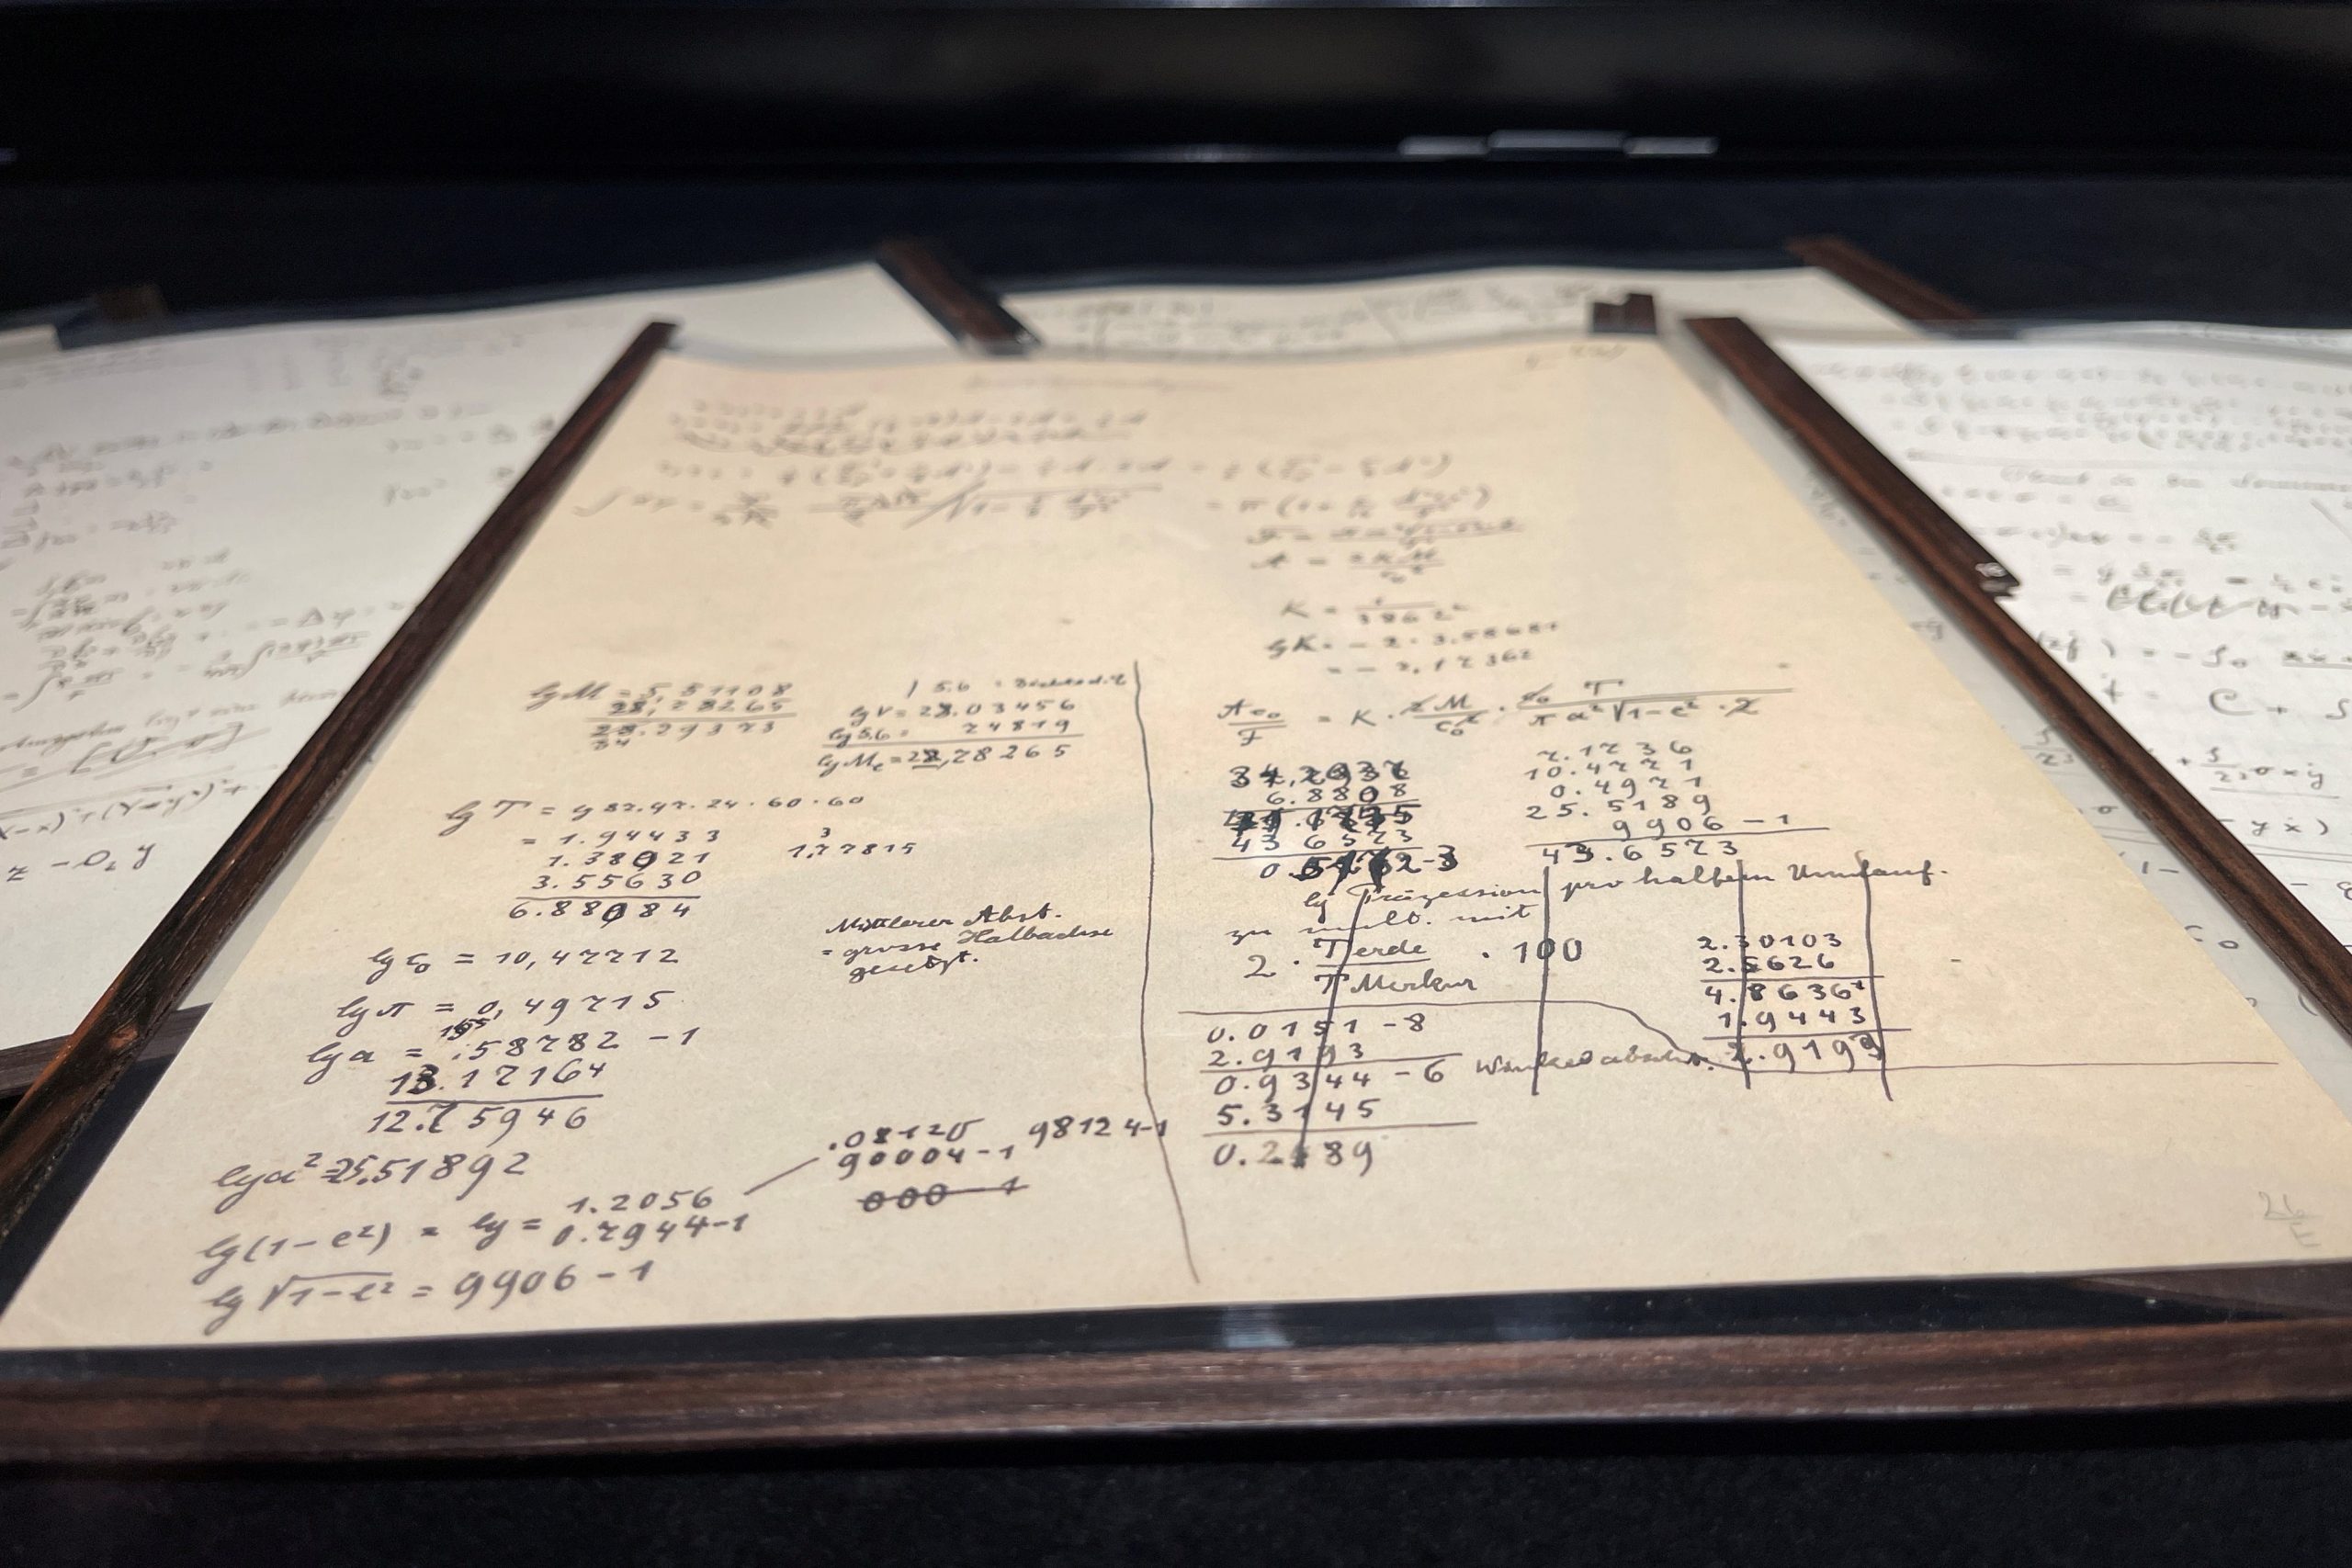 The Einstein-Besso manuscript on display before its auction at Christie's auction house in Paris.